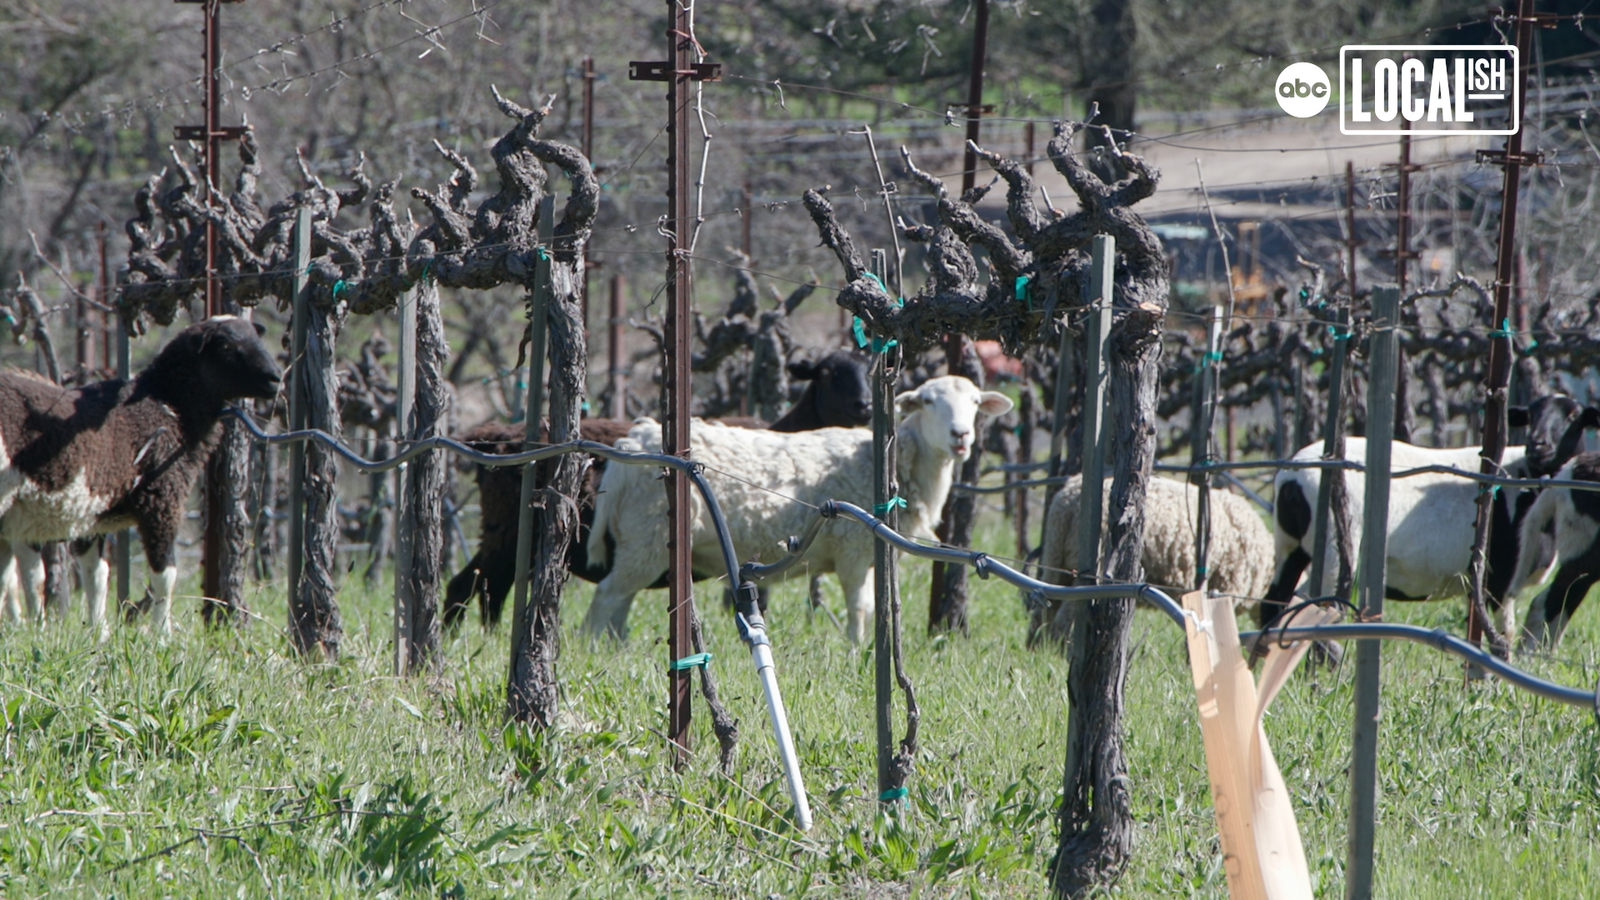 Napa Vineyard Sheep Grazing promotes sustainable agricultural practices and better wine [Video]